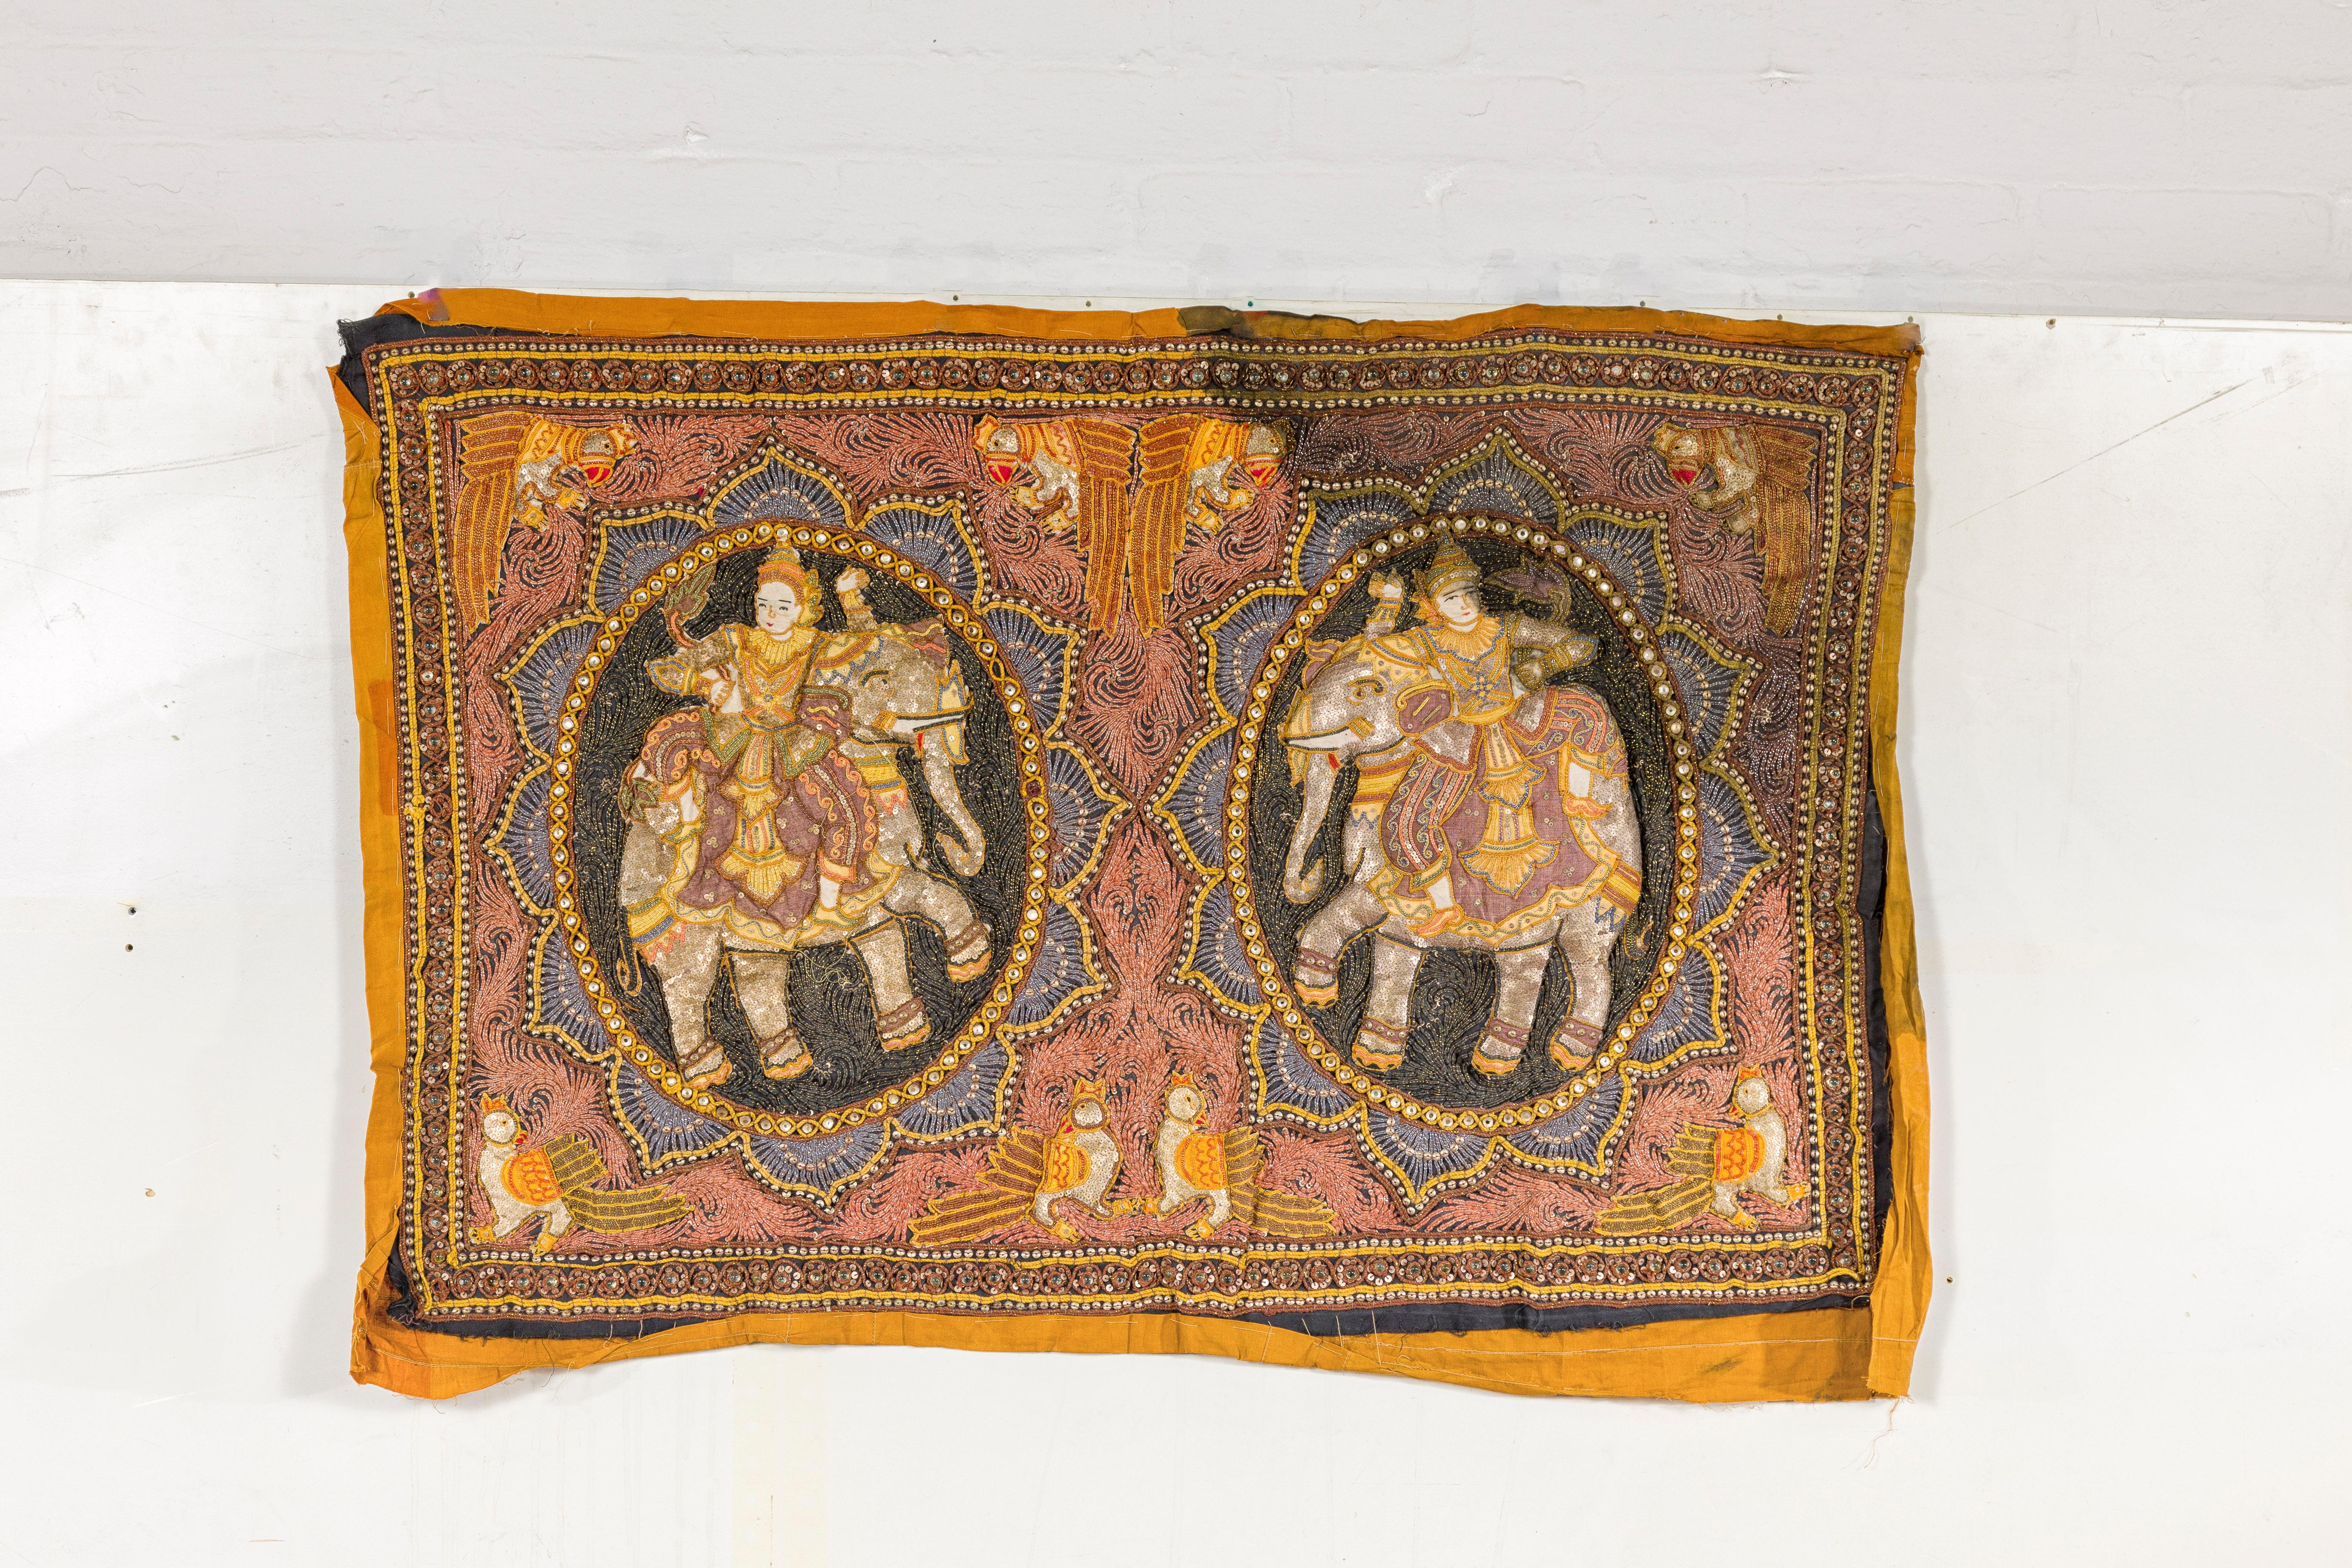 A 19th century Burmese double elephant with riding figures Kalaga tapestry with sequins, metallic threads and glass beads. Step into the opulent world of Burmese artistry with this stunning 19th-century double elephant Kalaga tapestry, a piece that